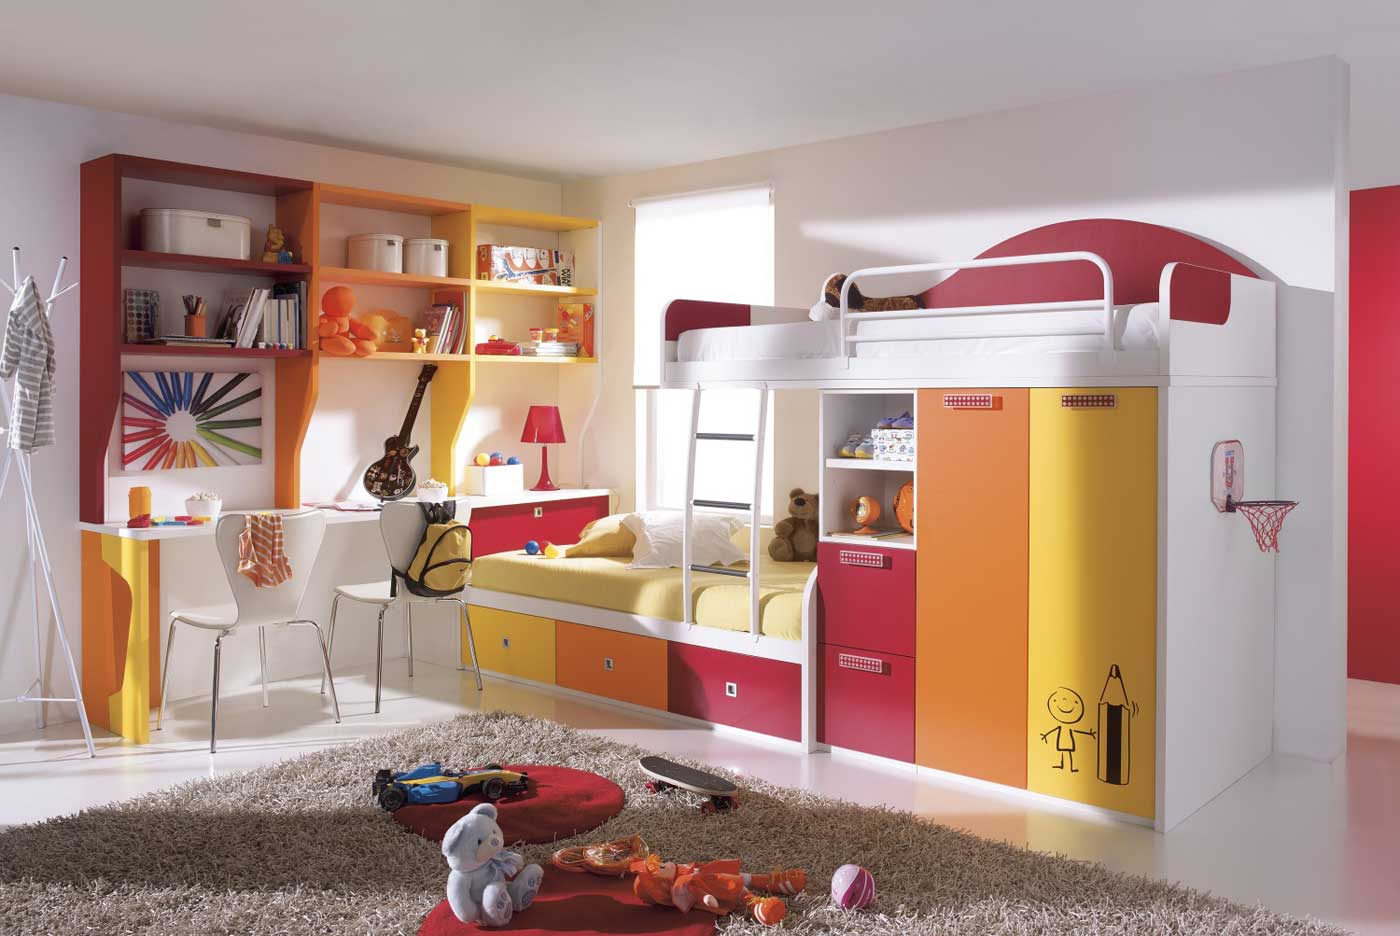 Assorted Color Furniture Charming Assorted Color Kids Bedroom Furniture Sets With Colorful Bed Kids And Modern Furniture Models Also Awesome Fur Rug Kids Bedroom Design With White Wall Kids Room Decorating Ideas Bedroom Kids Bedroom Sets: Combining The Color Ideas